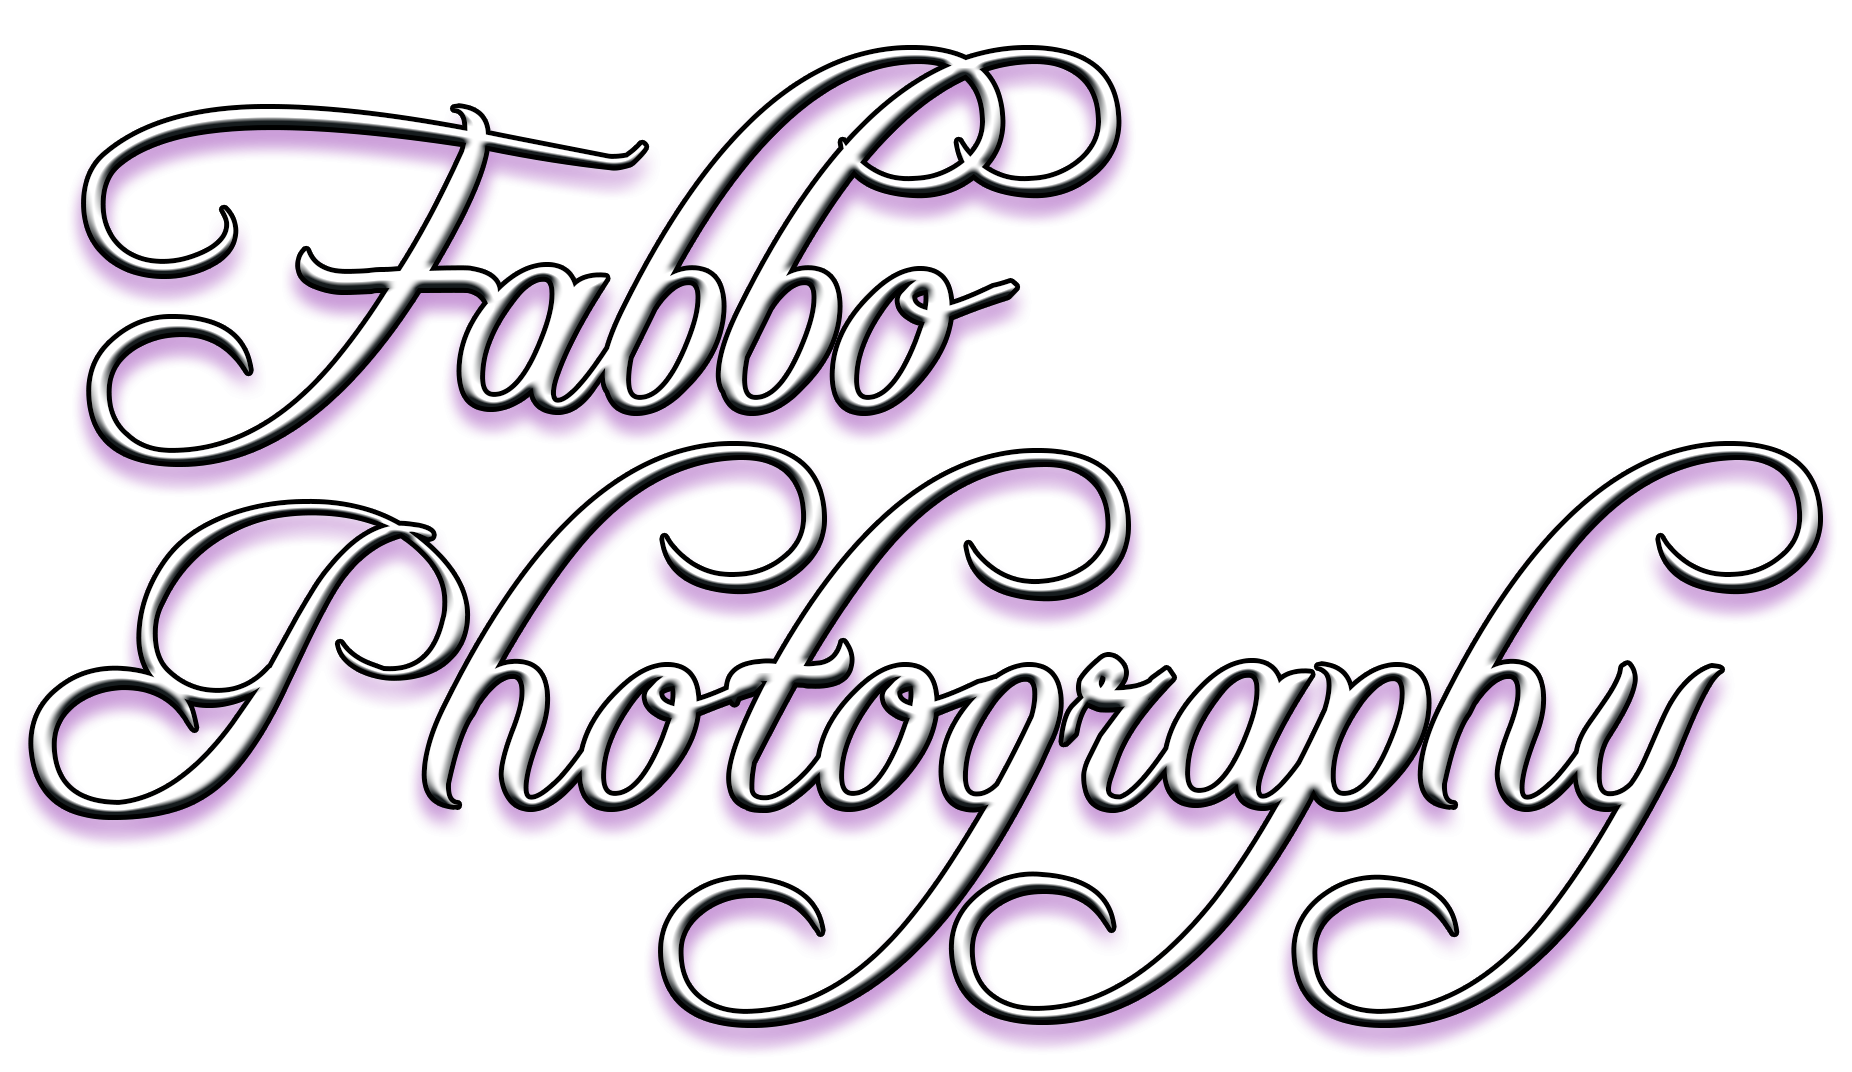 Fabbo Photography Clayton